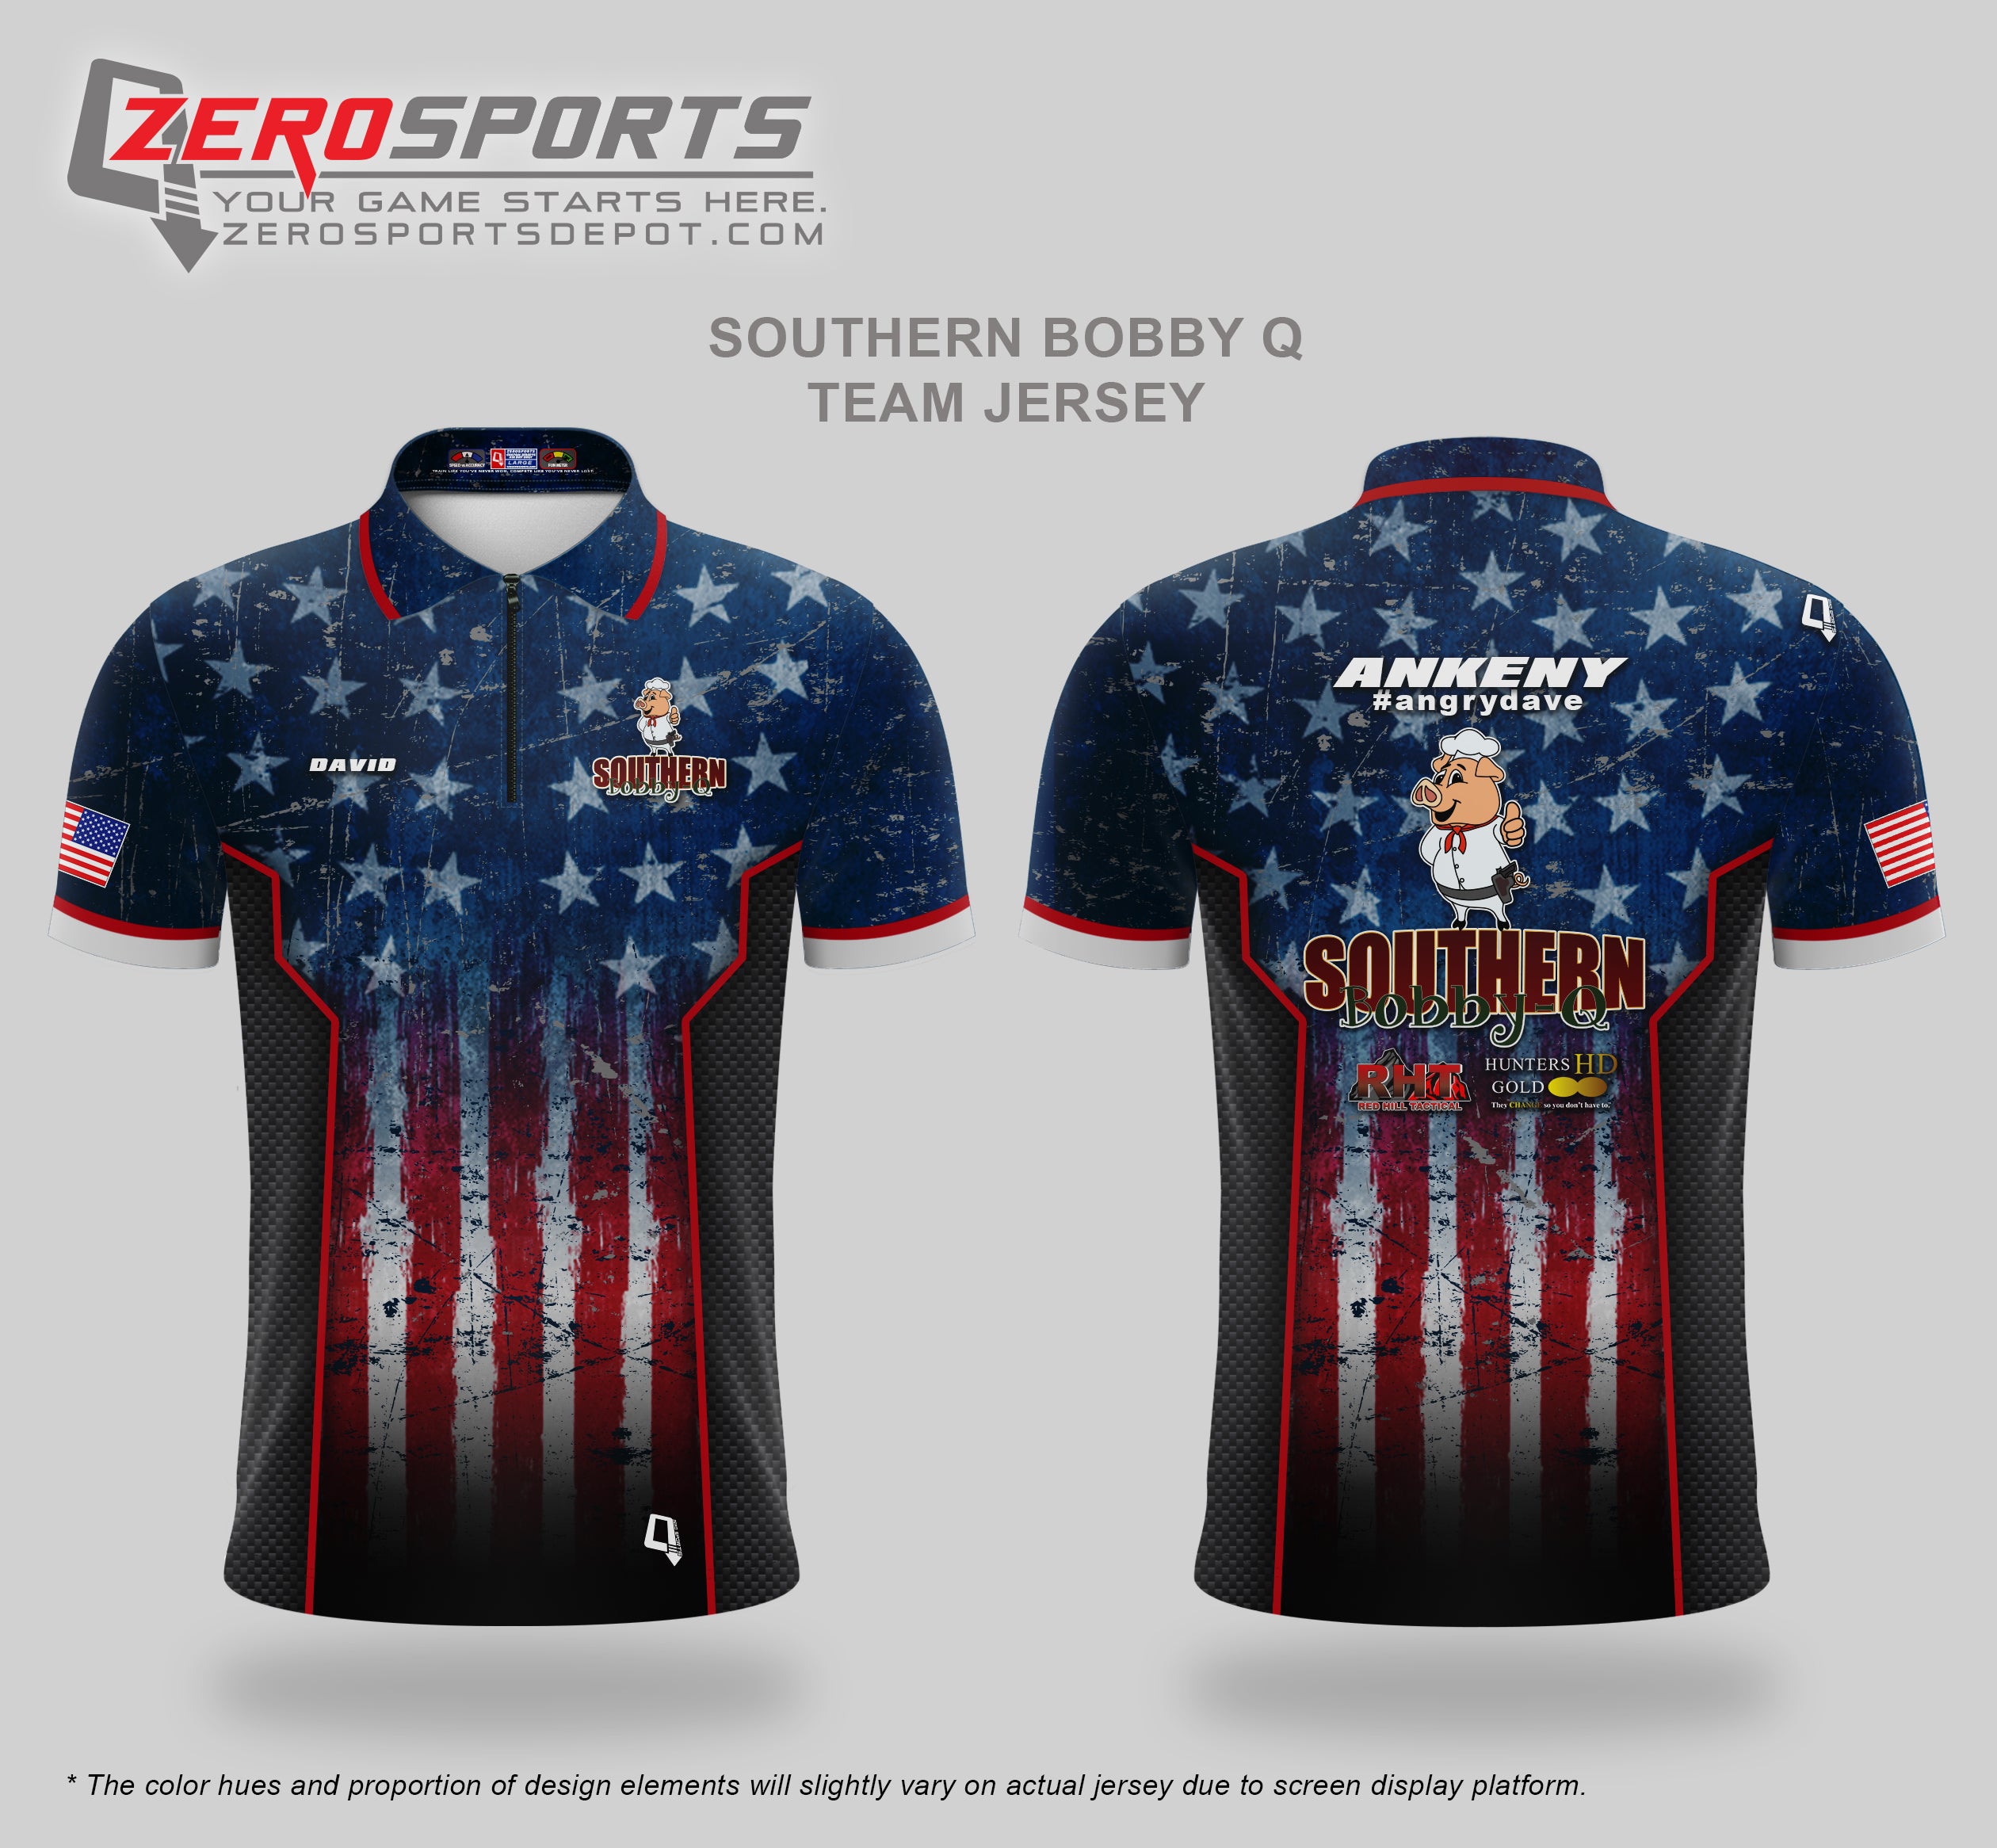 Southern Bobby Q Team Jersey